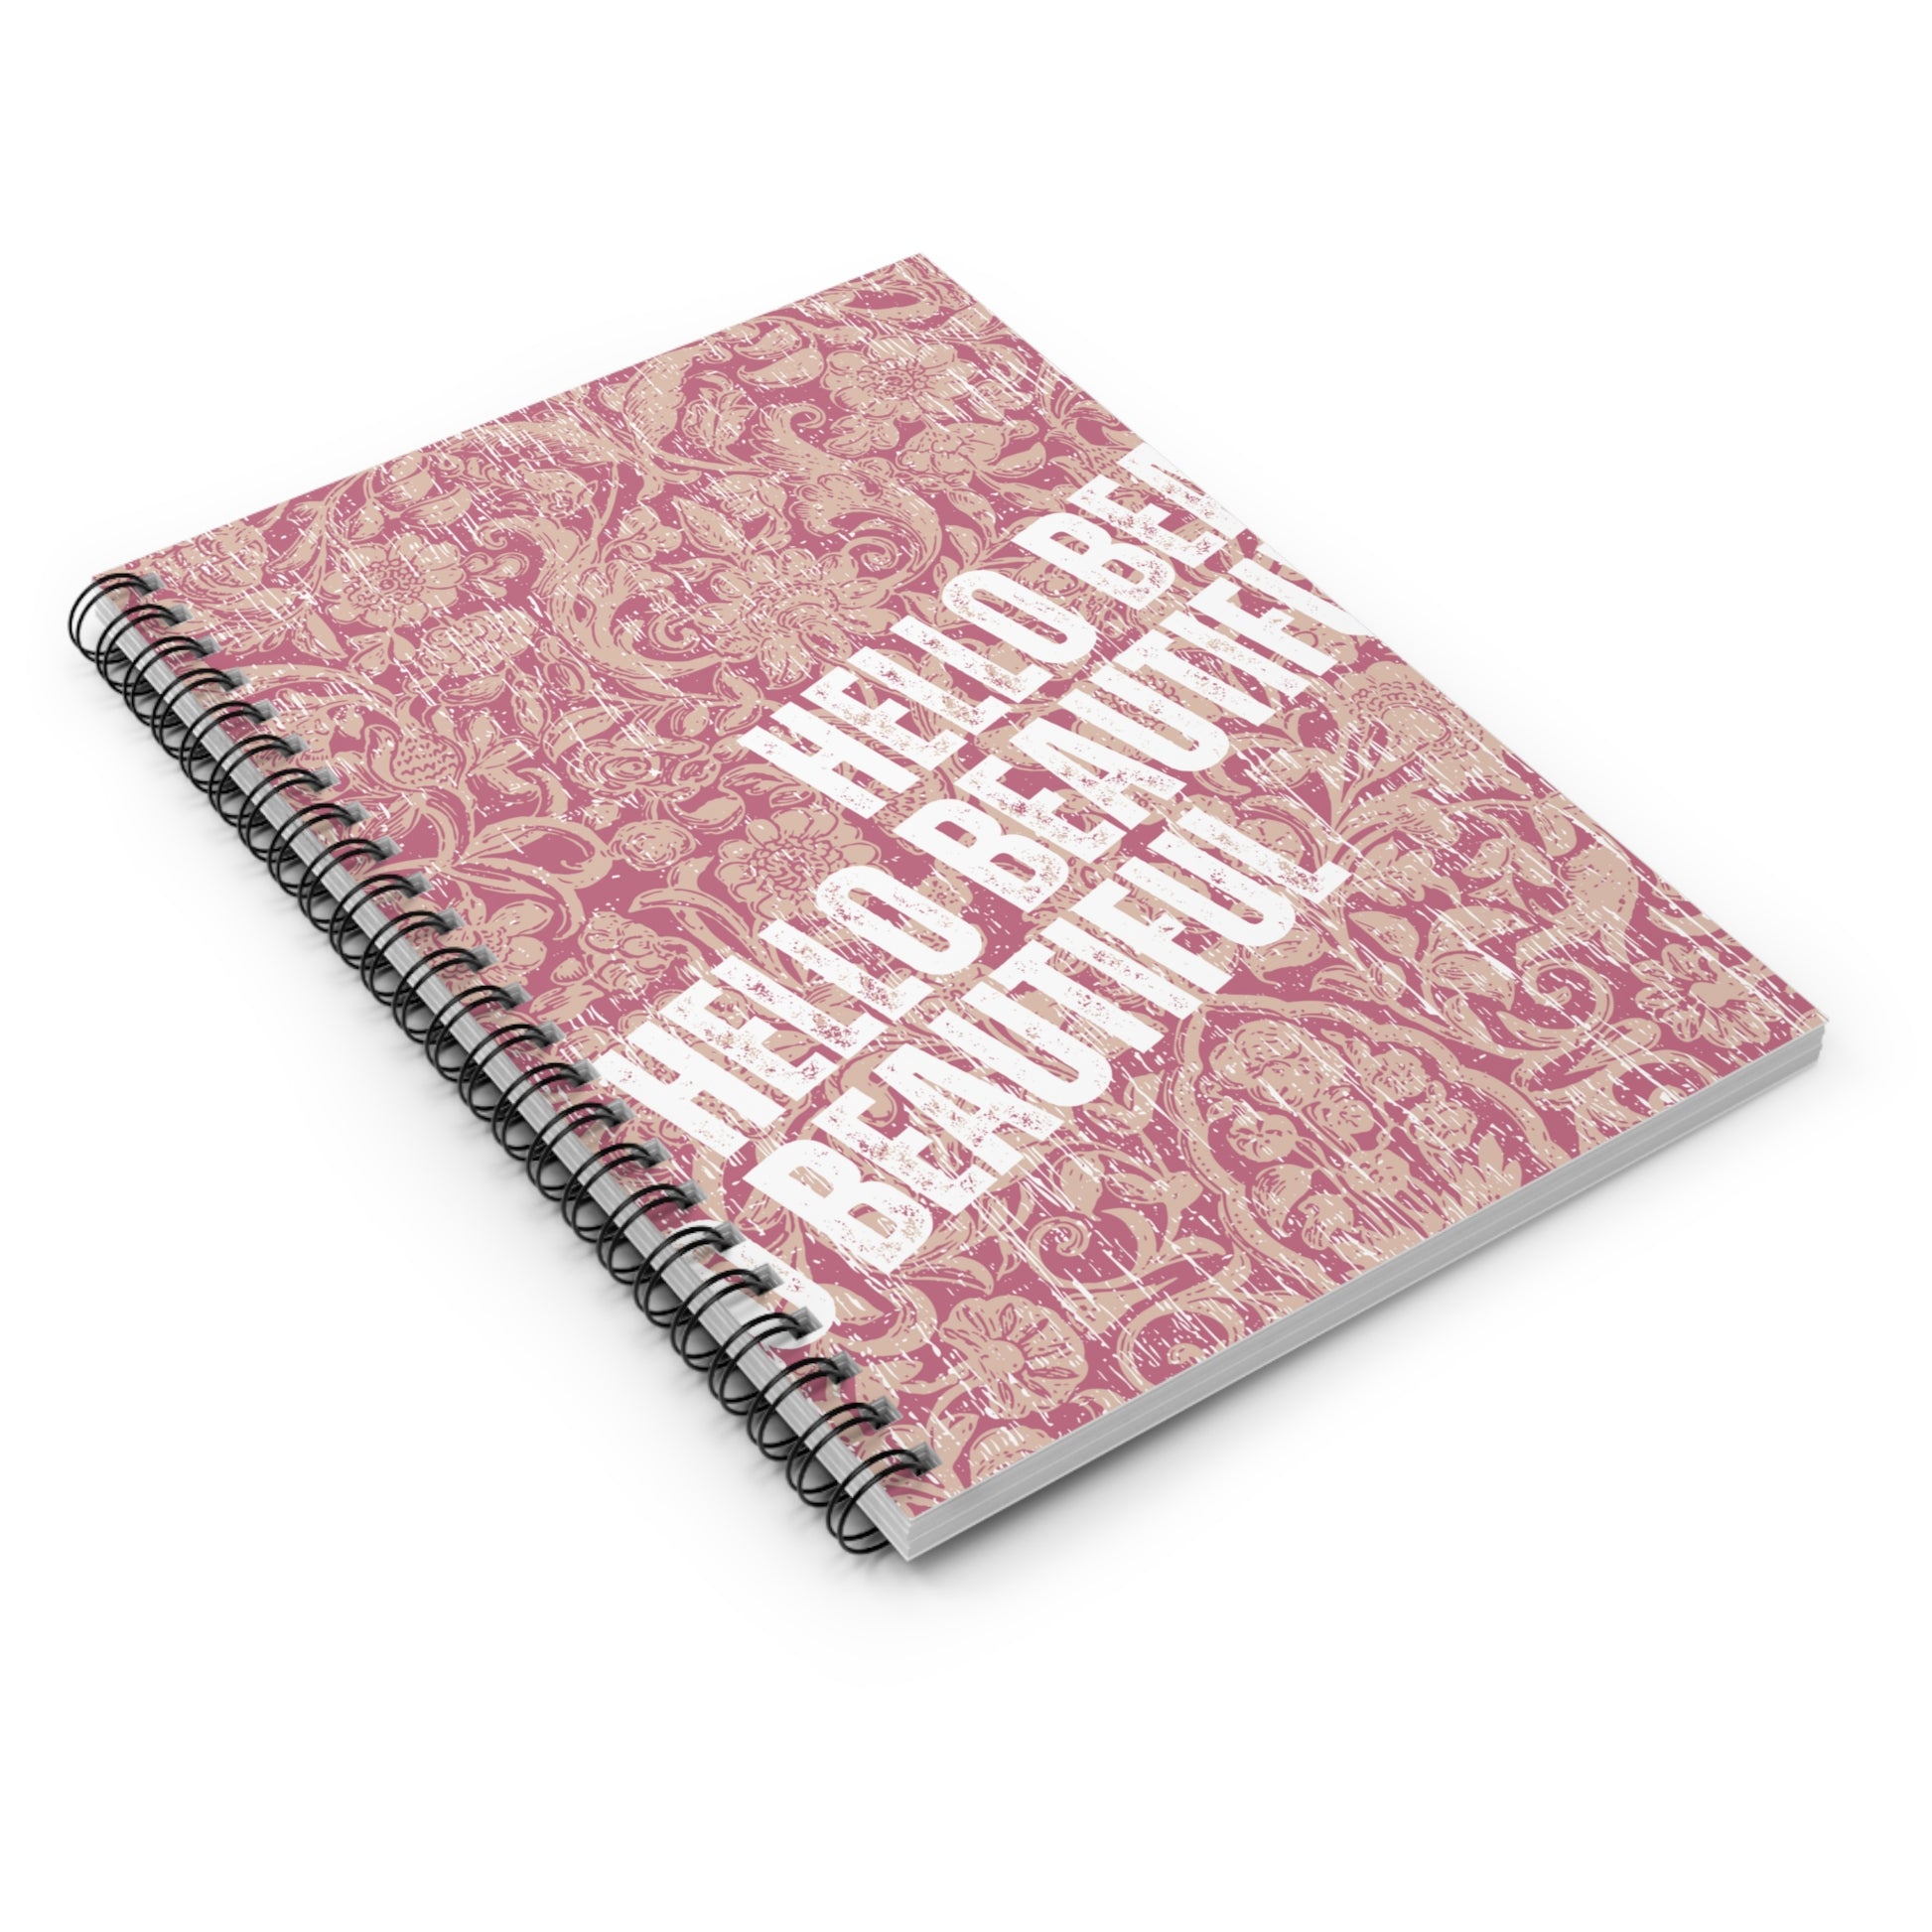 Hello Beautiful: Stylish Spiral Notebook for Positive Reflections and Creative Expression - Eddy and Rita